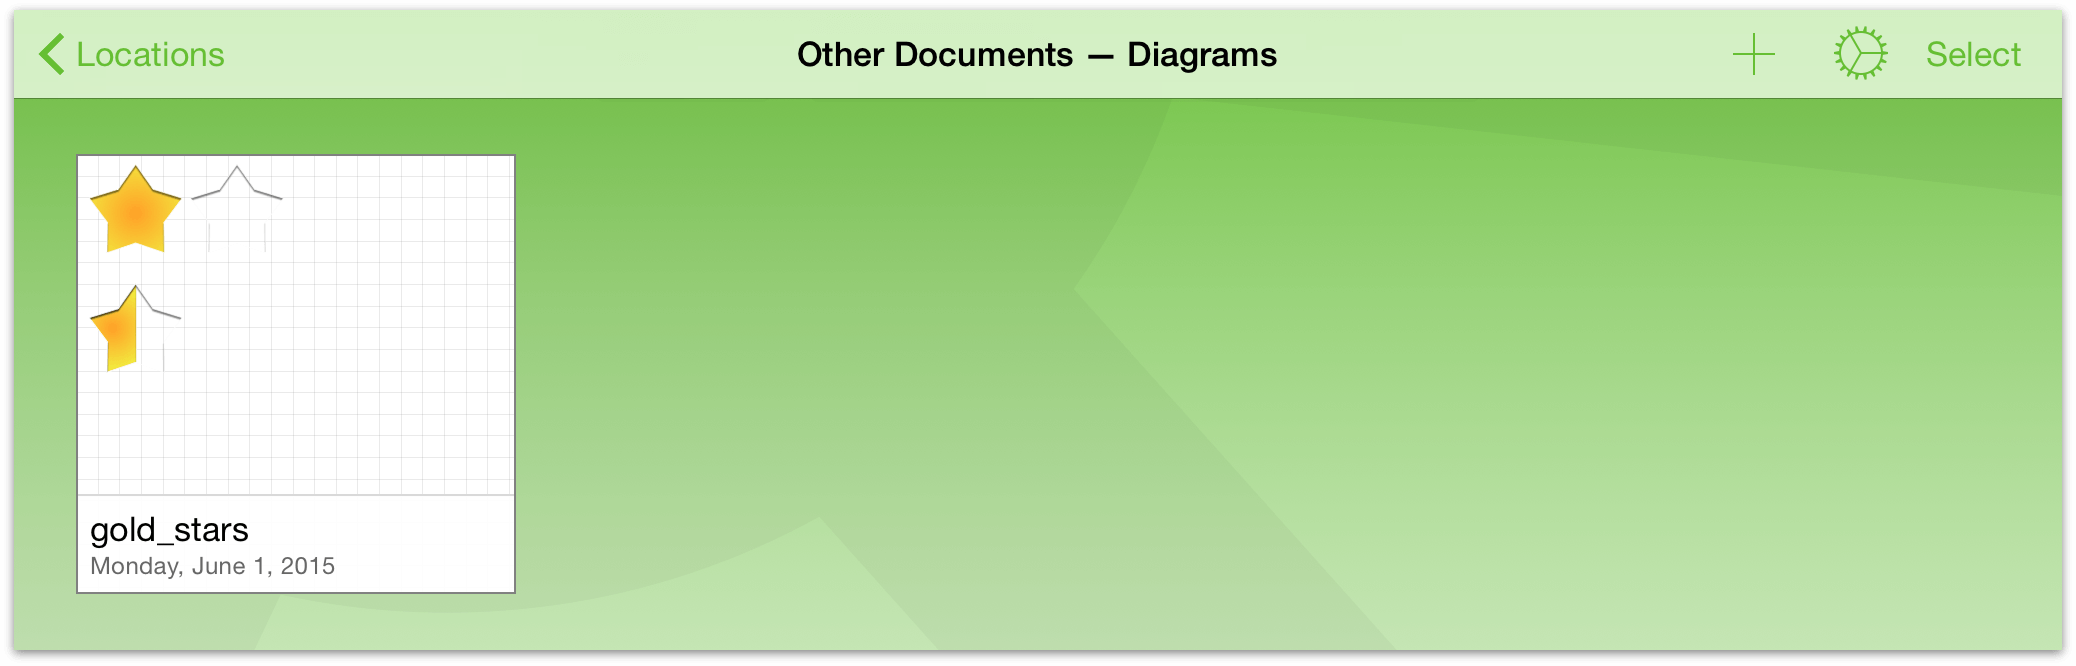 The file from iCloud Drive now appears in the Other Documents folder on your device; tap to open the file in OmniGraffle